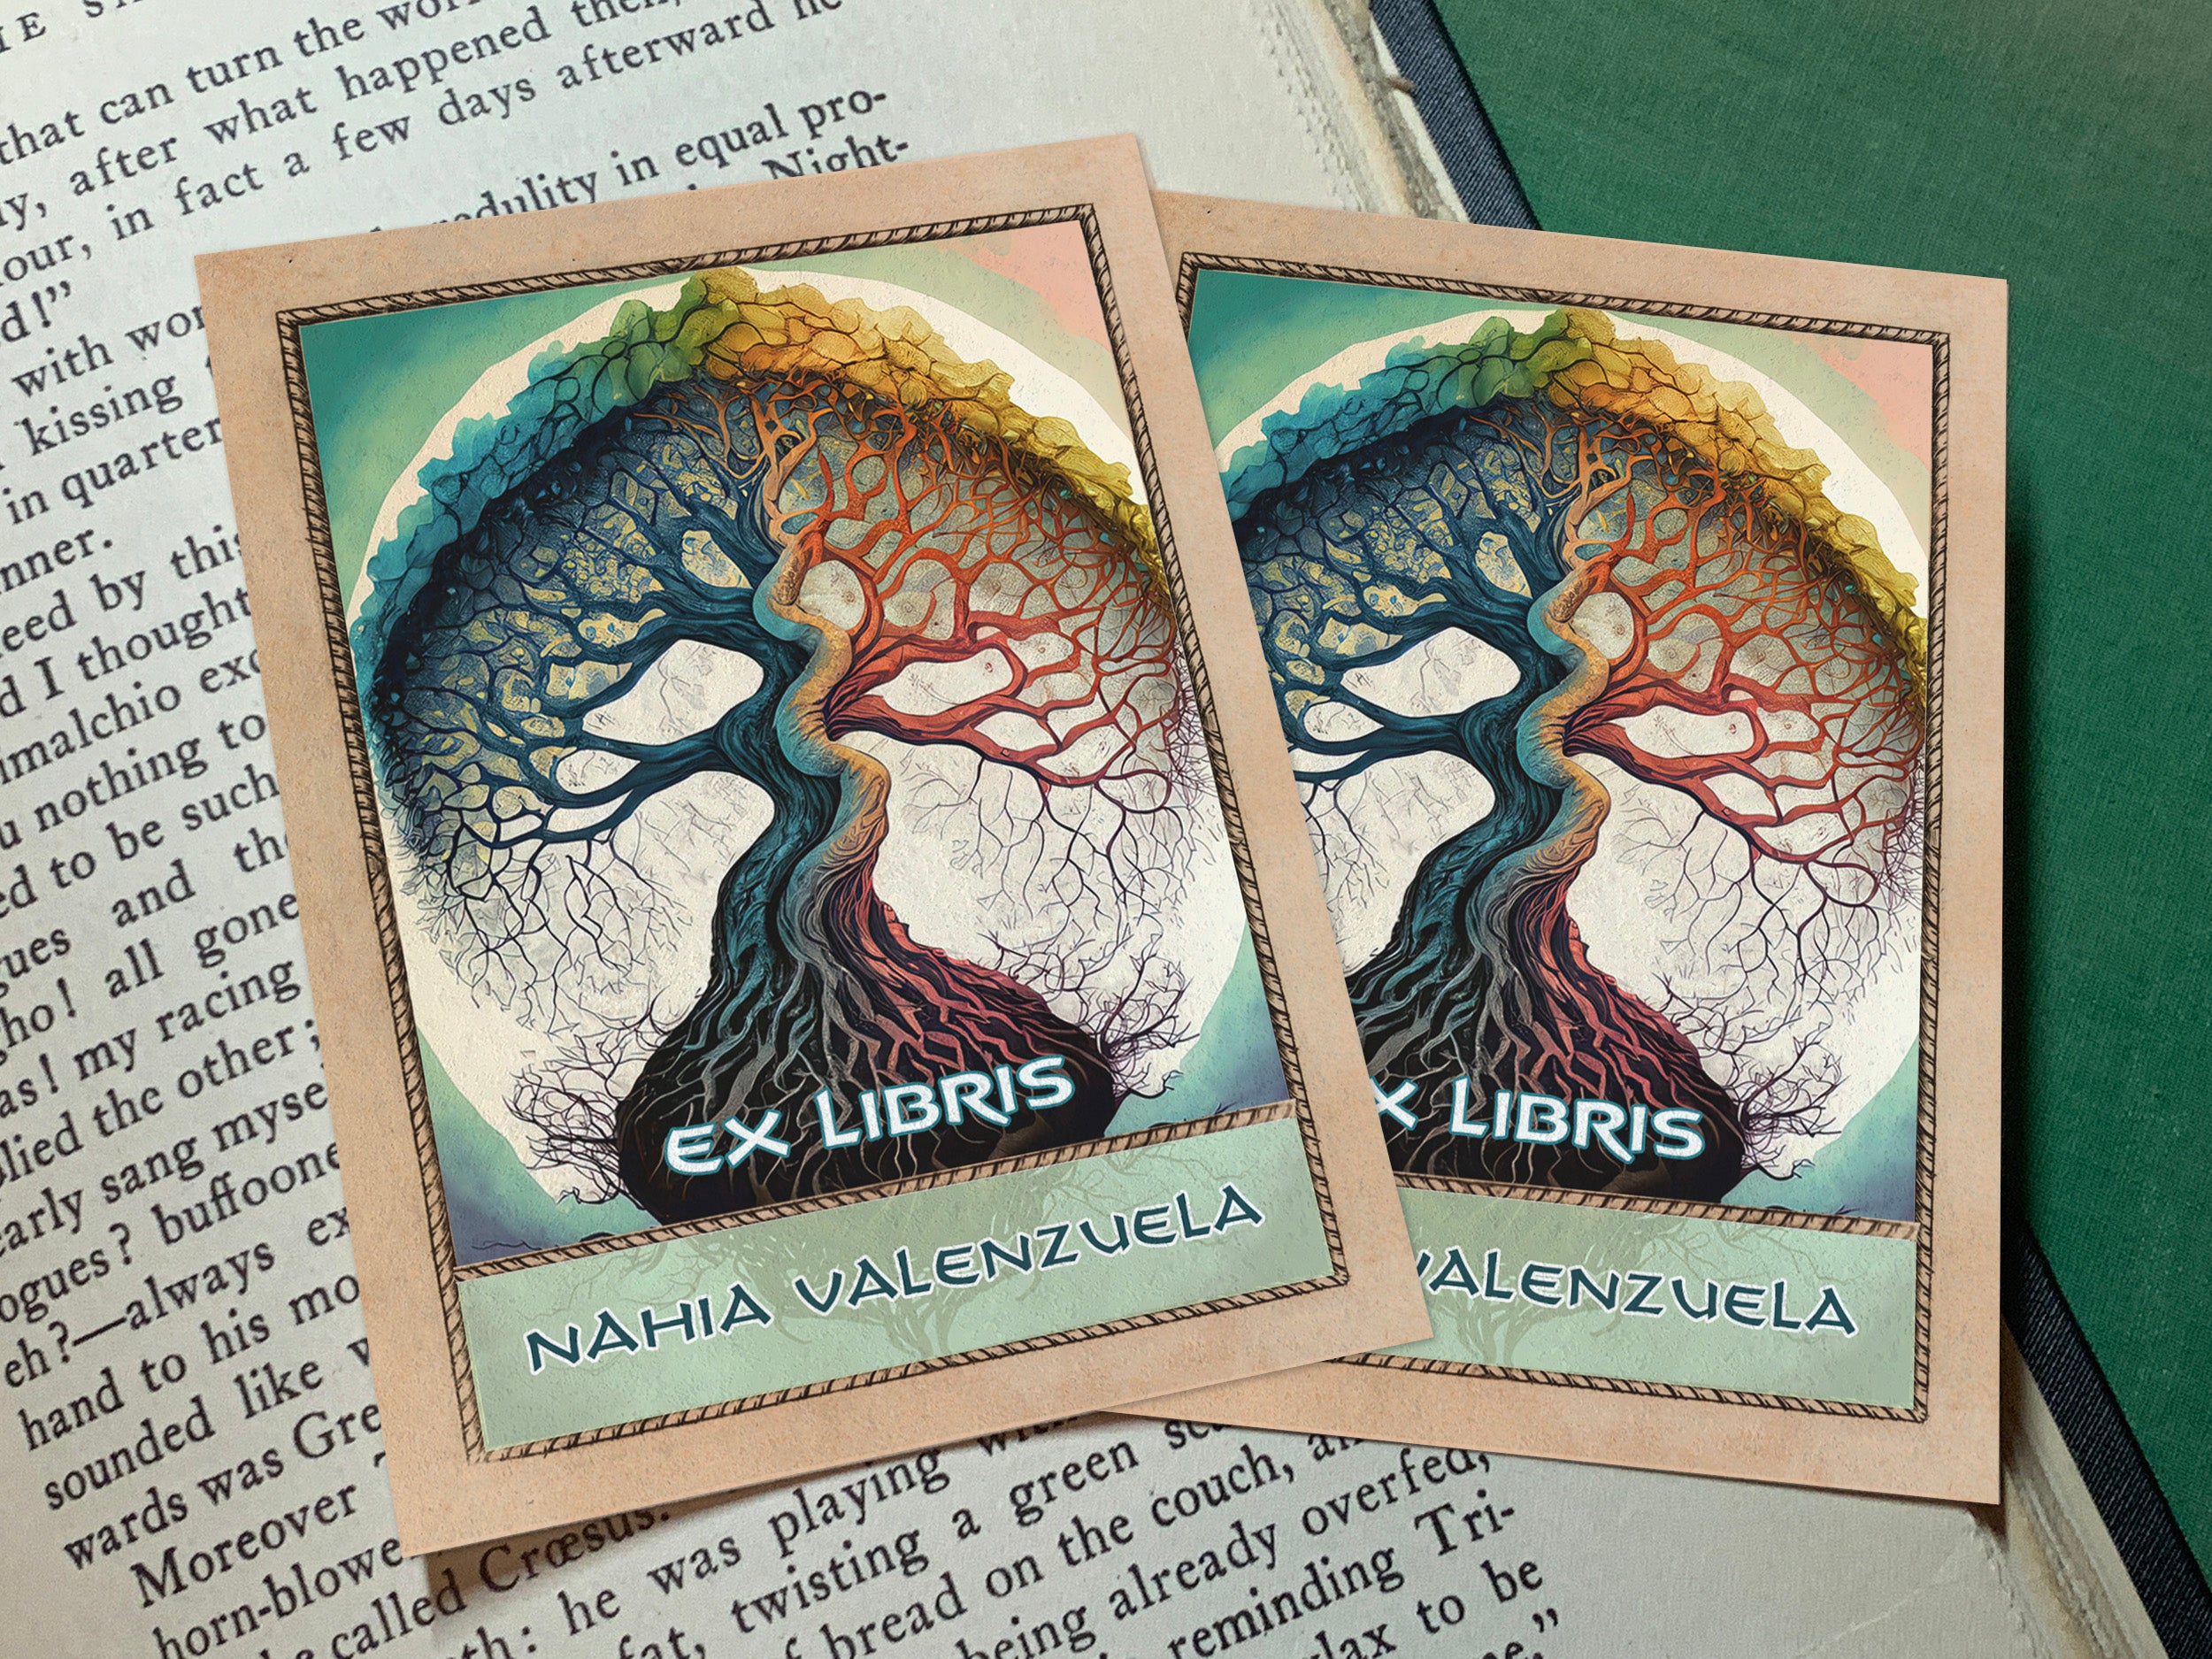 Yggdrasil, Personalized Ex-Libris Bookplates, Crafted on Traditional Gummed Paper, 3in x 4in, Set of 30